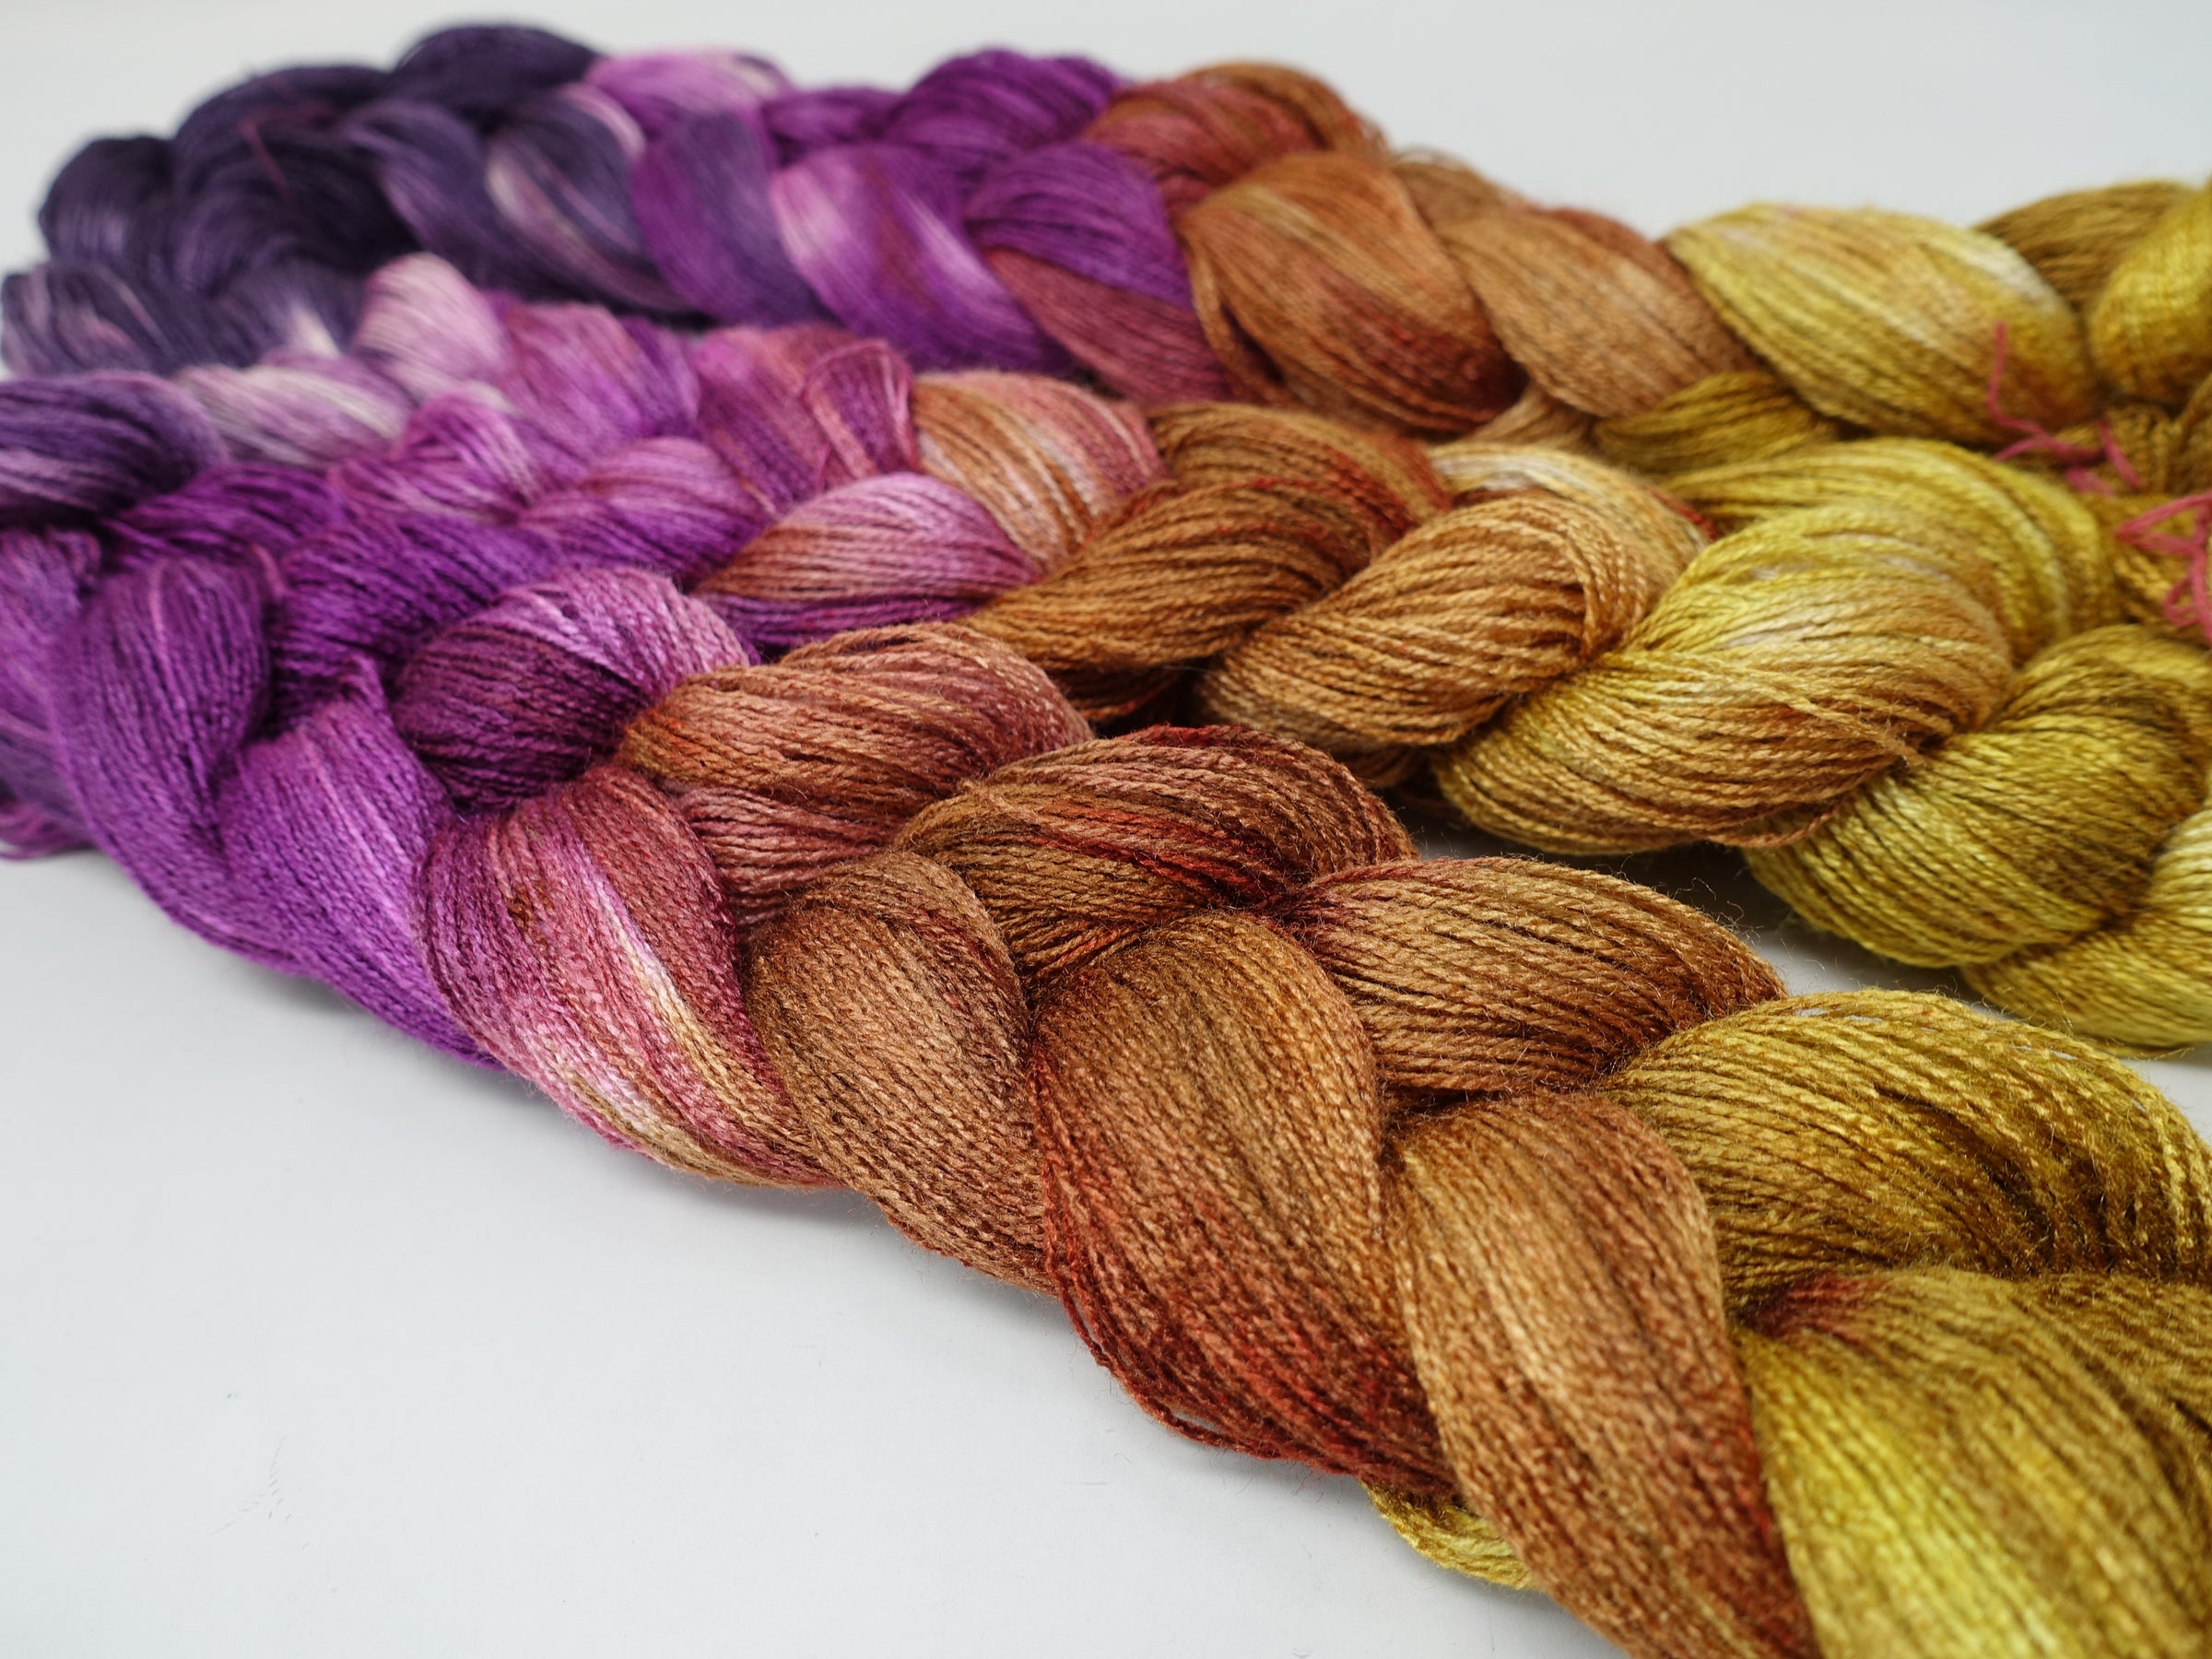 Hand Dyed Gradient Warp- Tussah Silk 2/20NM ~1000m per 100g, 320ends ~2.2m or 5m length